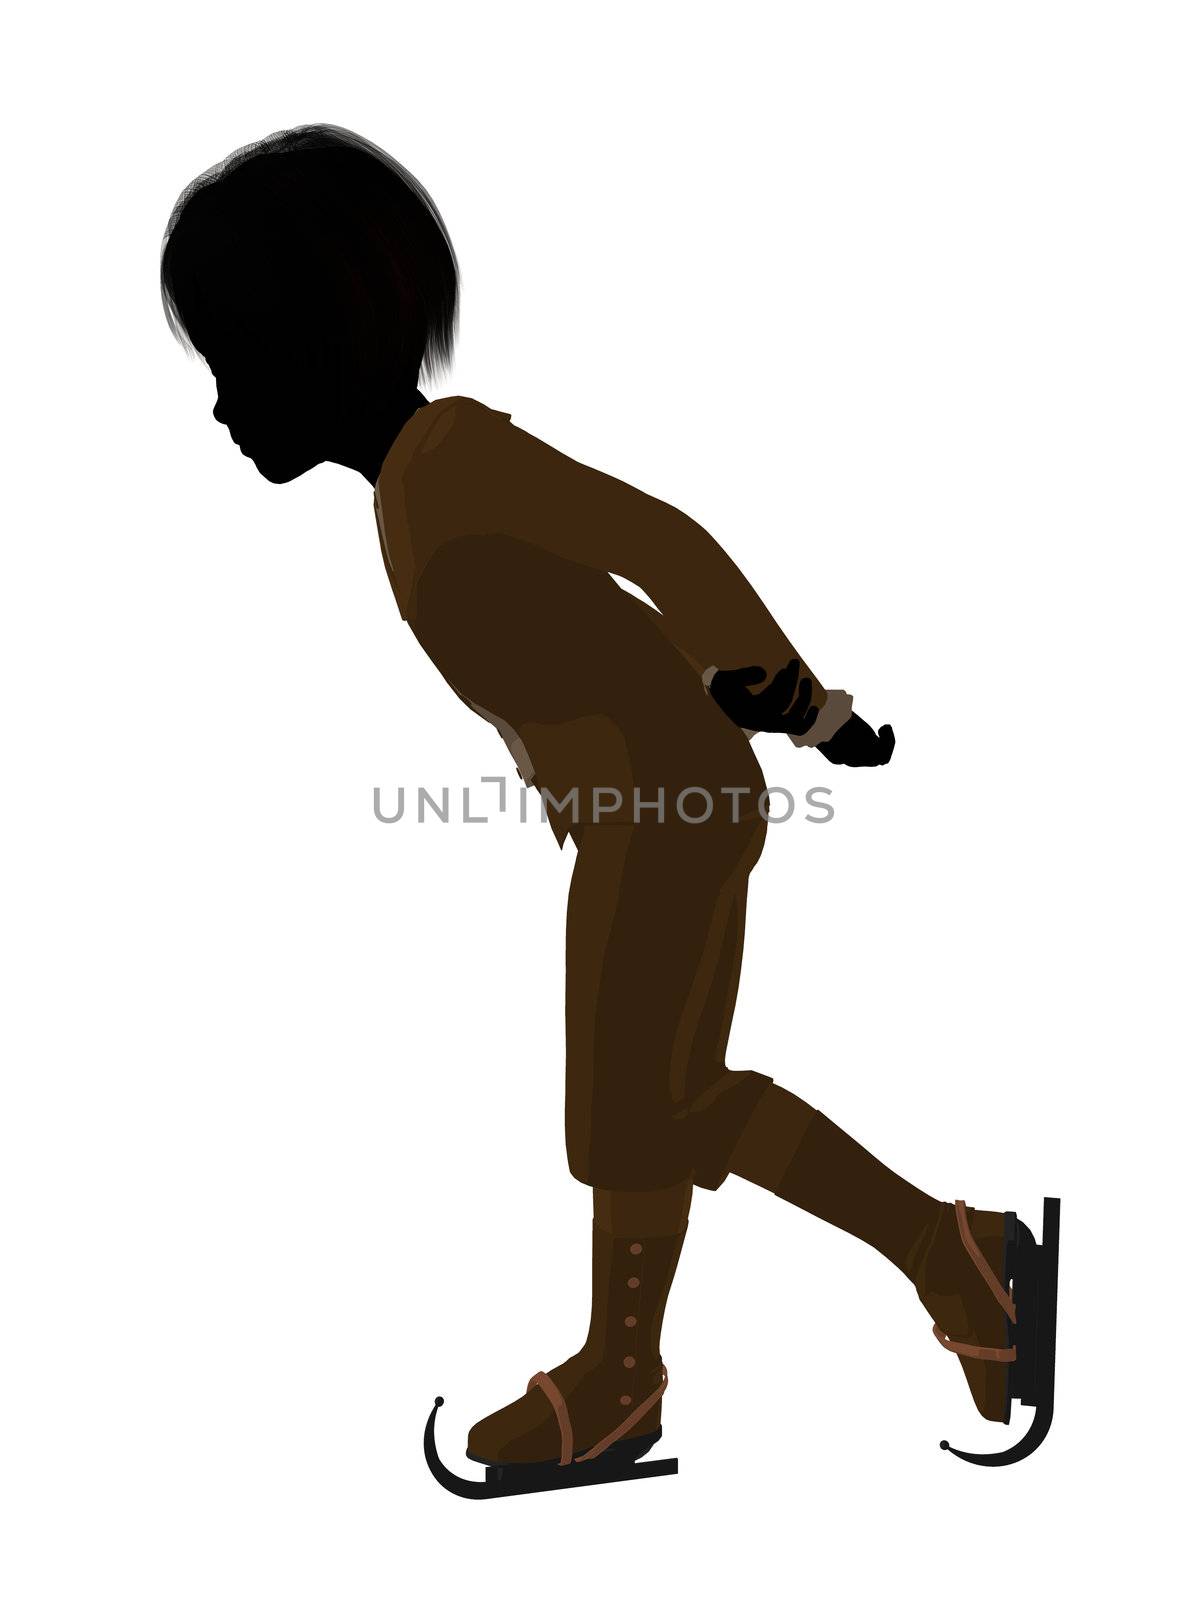 Victorian Boy Ice Skating Illustration Silhouette by kathygold